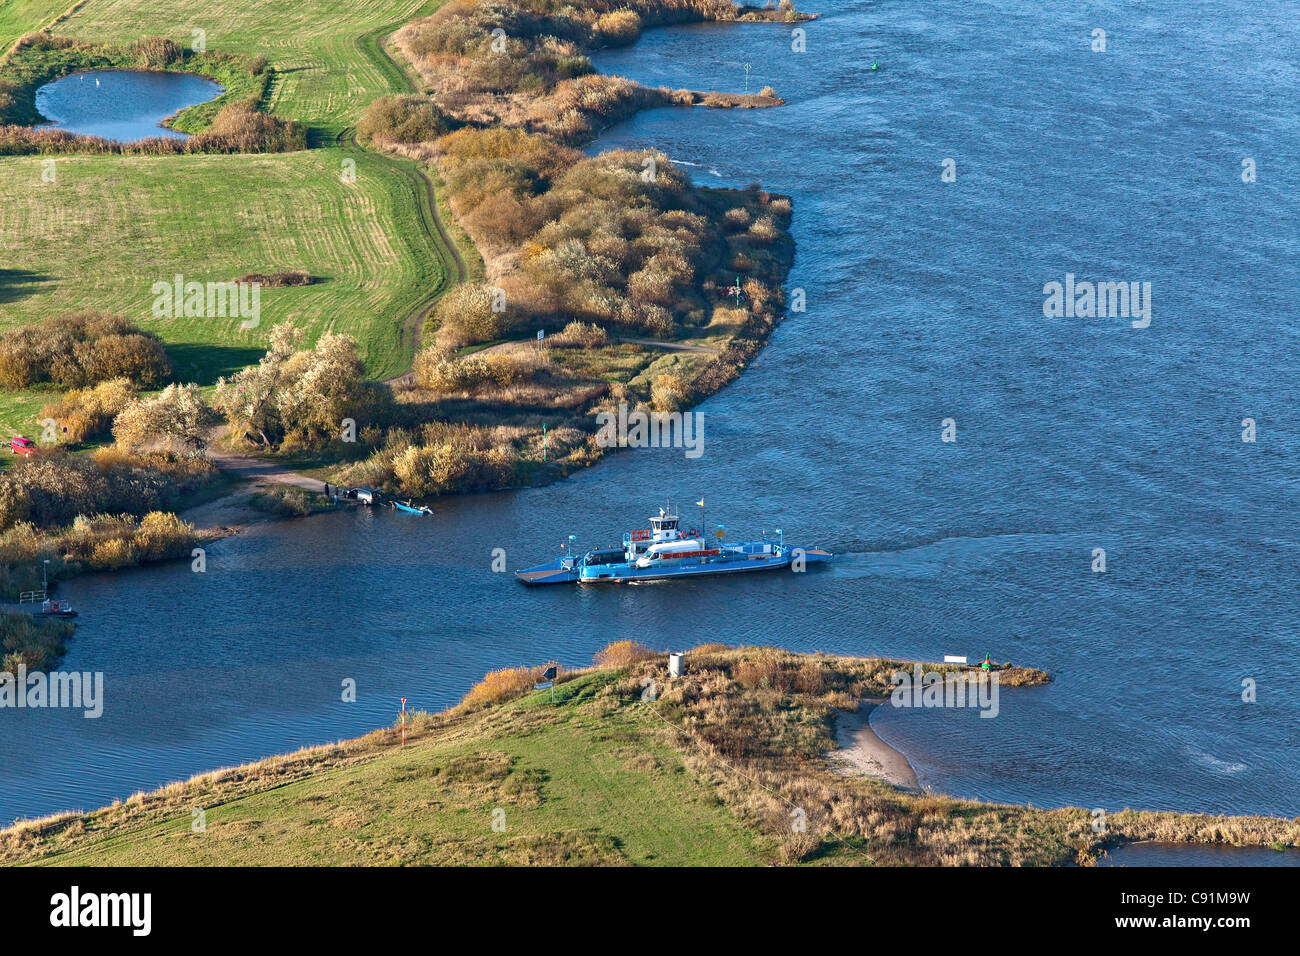 Aerial photo of a car ferry near Bleckede on the River Elbe, Lower Saxony, Germany Stock Photo